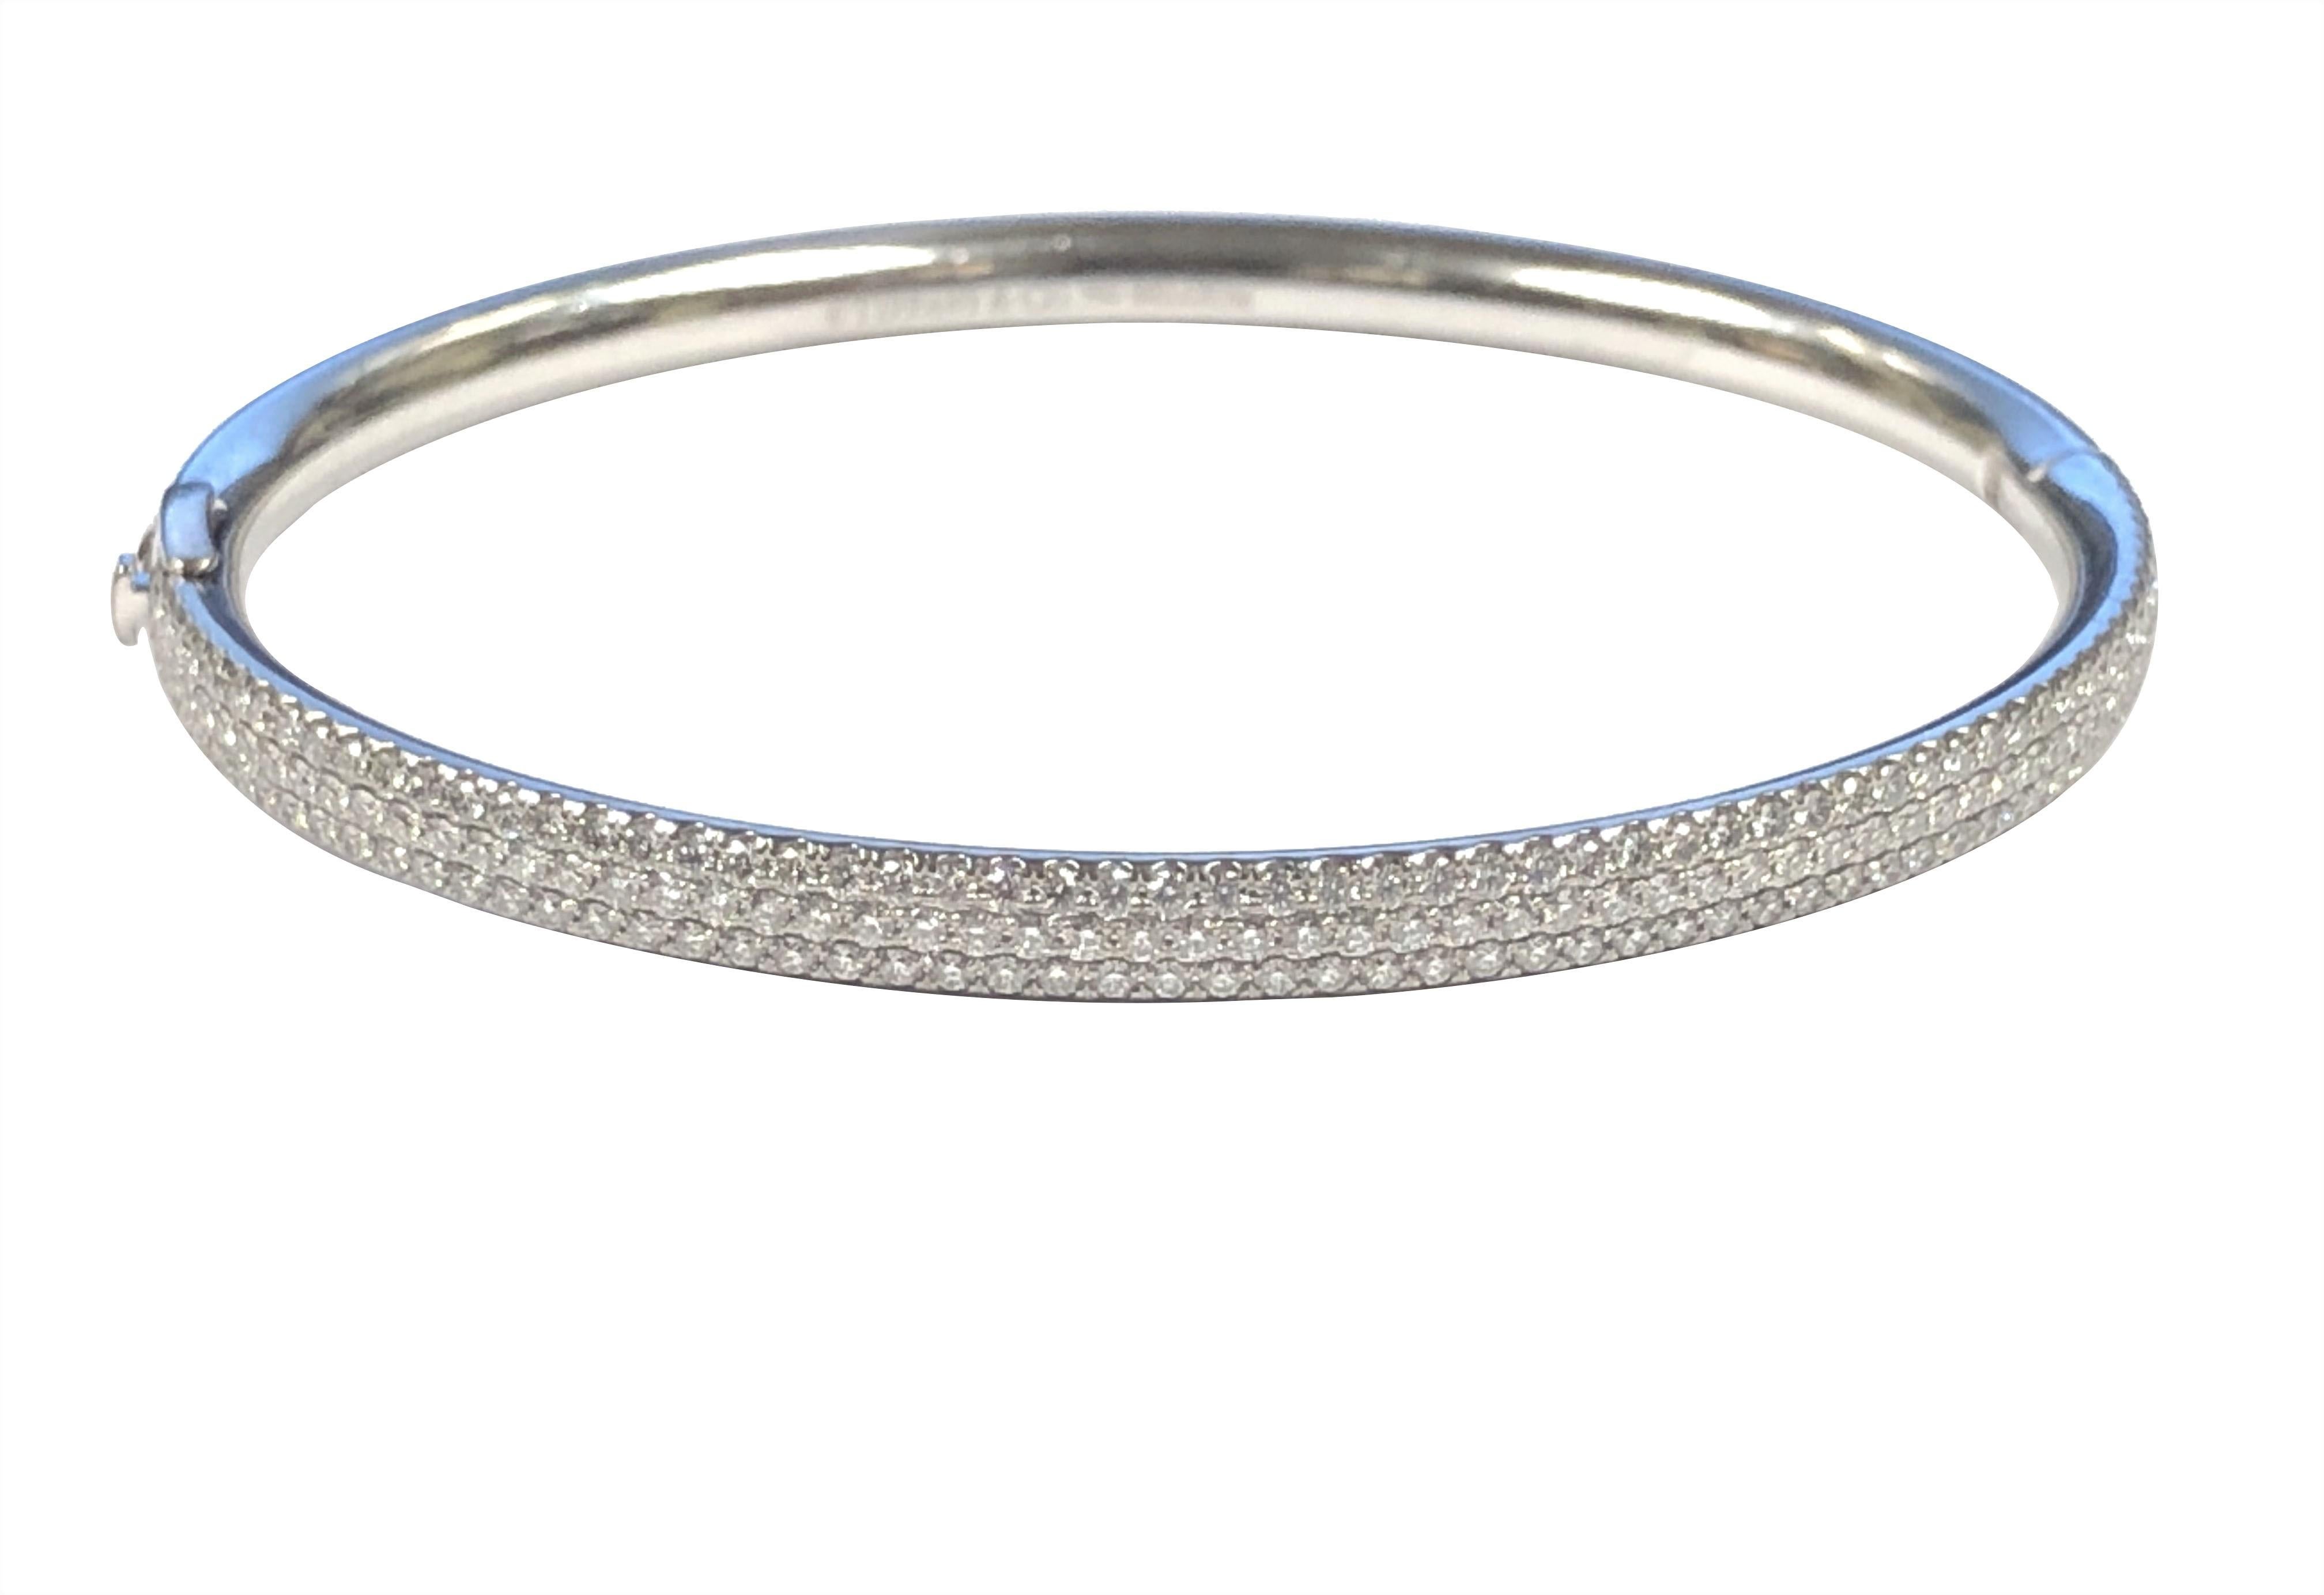 Circa 2020 Tiffany & Company Metro collection 18k White Gold Bangle Bracelet, 4 M.M. wide and set with Round Brilliant cut Diamonds totaling 3 carats. Wrist size 6 3/4 inches. Comes in a Tiffany Suede Travel Pouch. Current Retail of this piece is